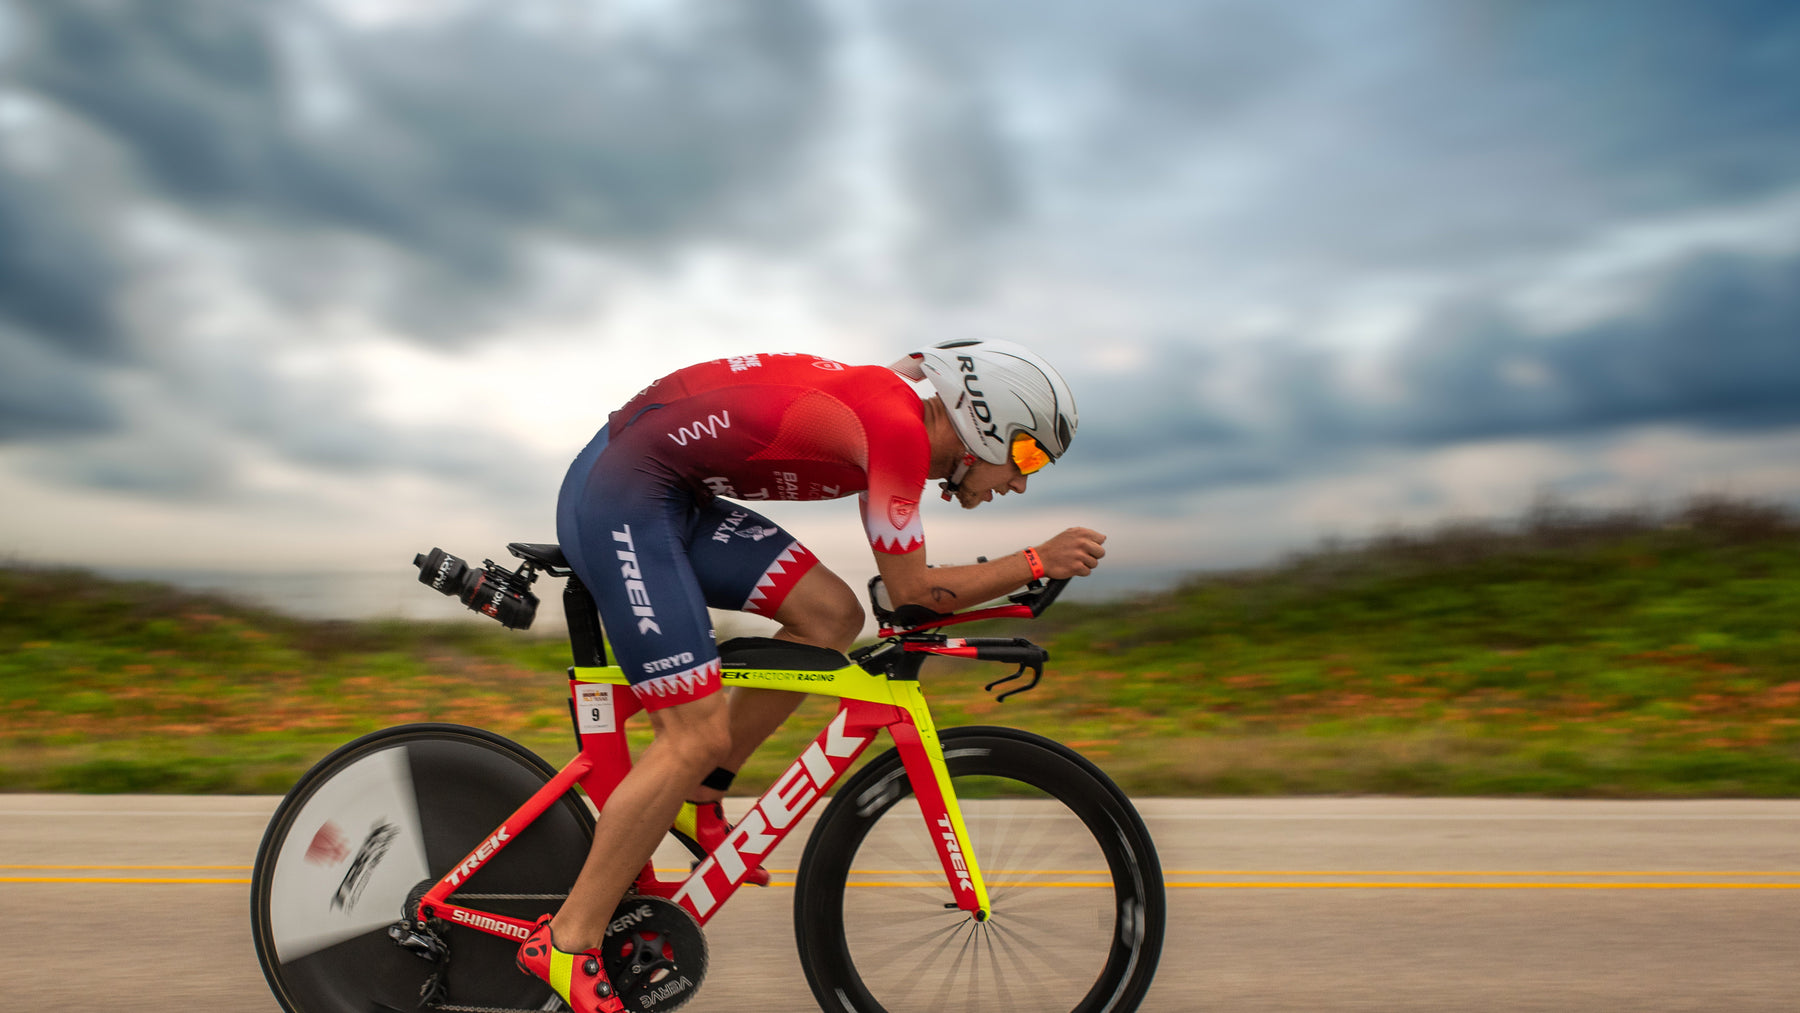 Rudy Project’s Dominant Start to the 2018 Triathlon Season With Emphatic Wins from Ben Kanute and Mel Hauschildt